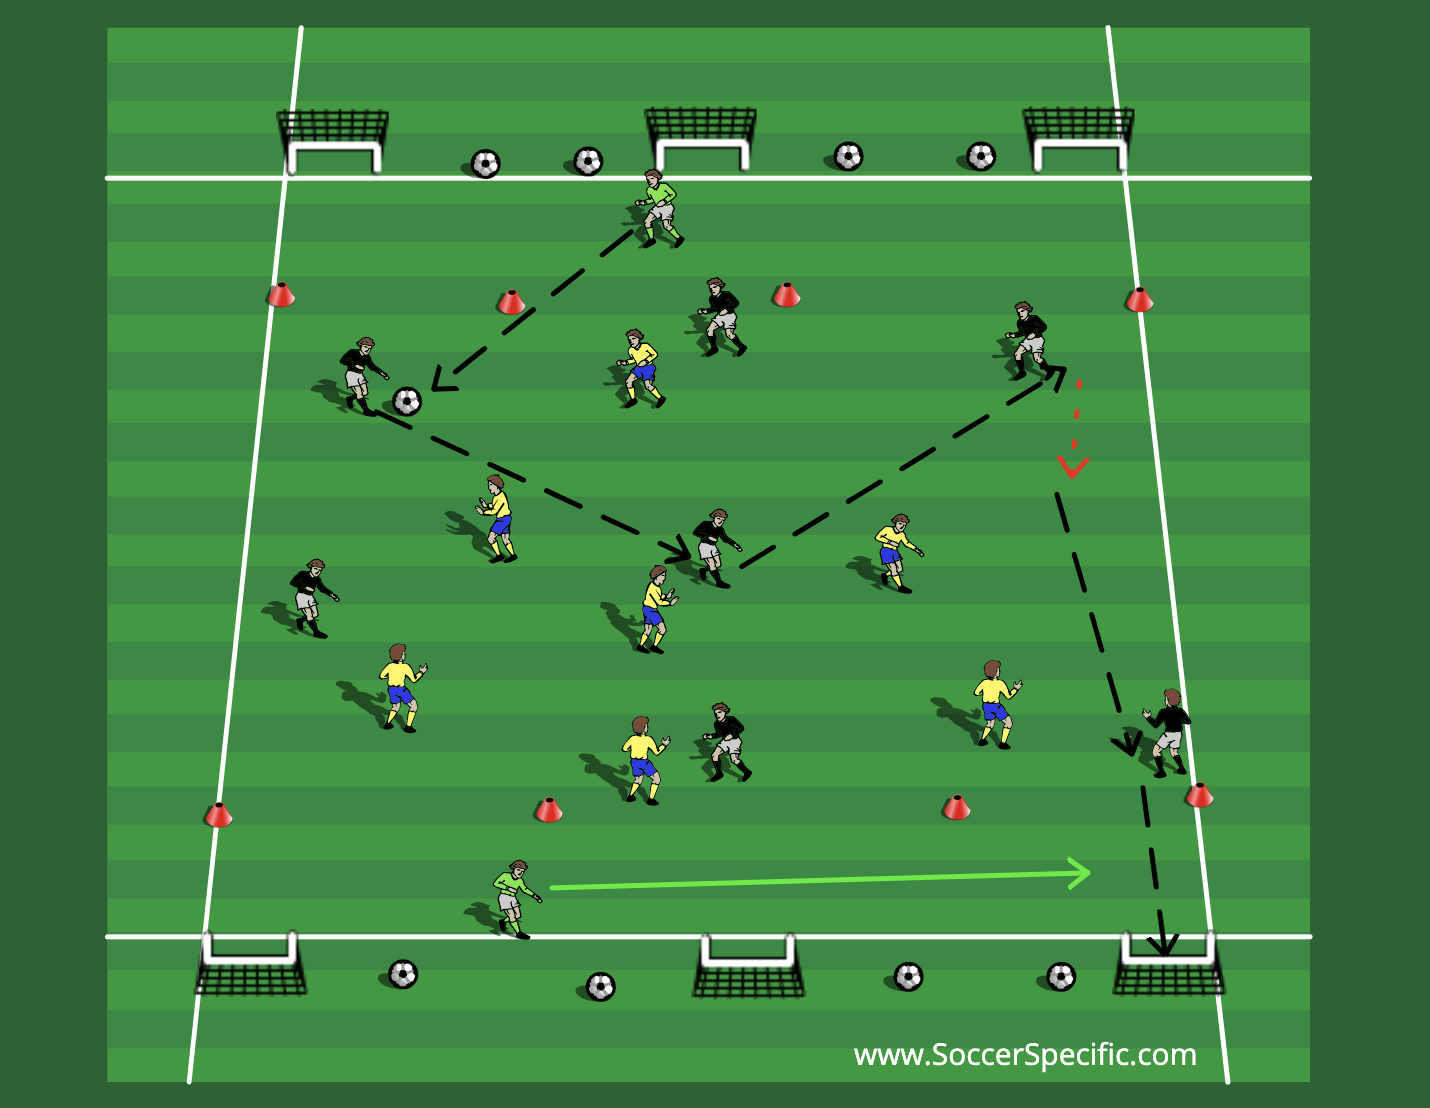 Switch and Slice | SoccerSpecific.com